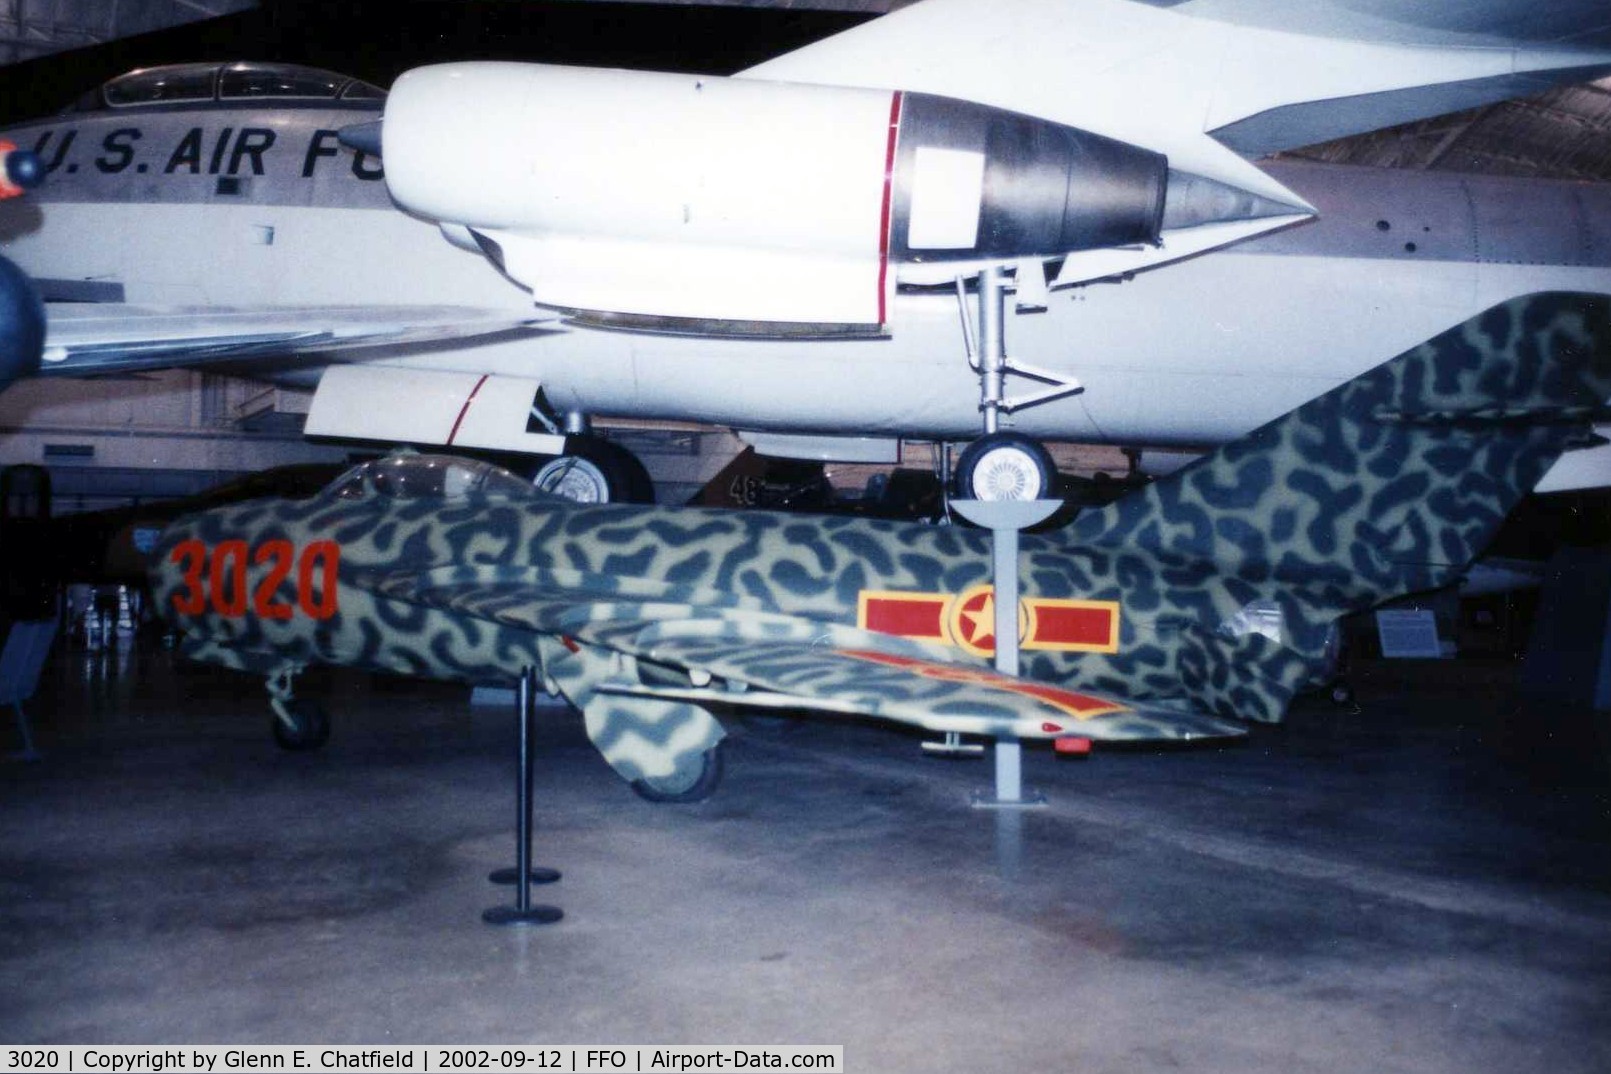 3020, Mikoyan-Gurevich MiG-17C C/N 799, MiG-17C at the National Museum of the U.S. Air Force